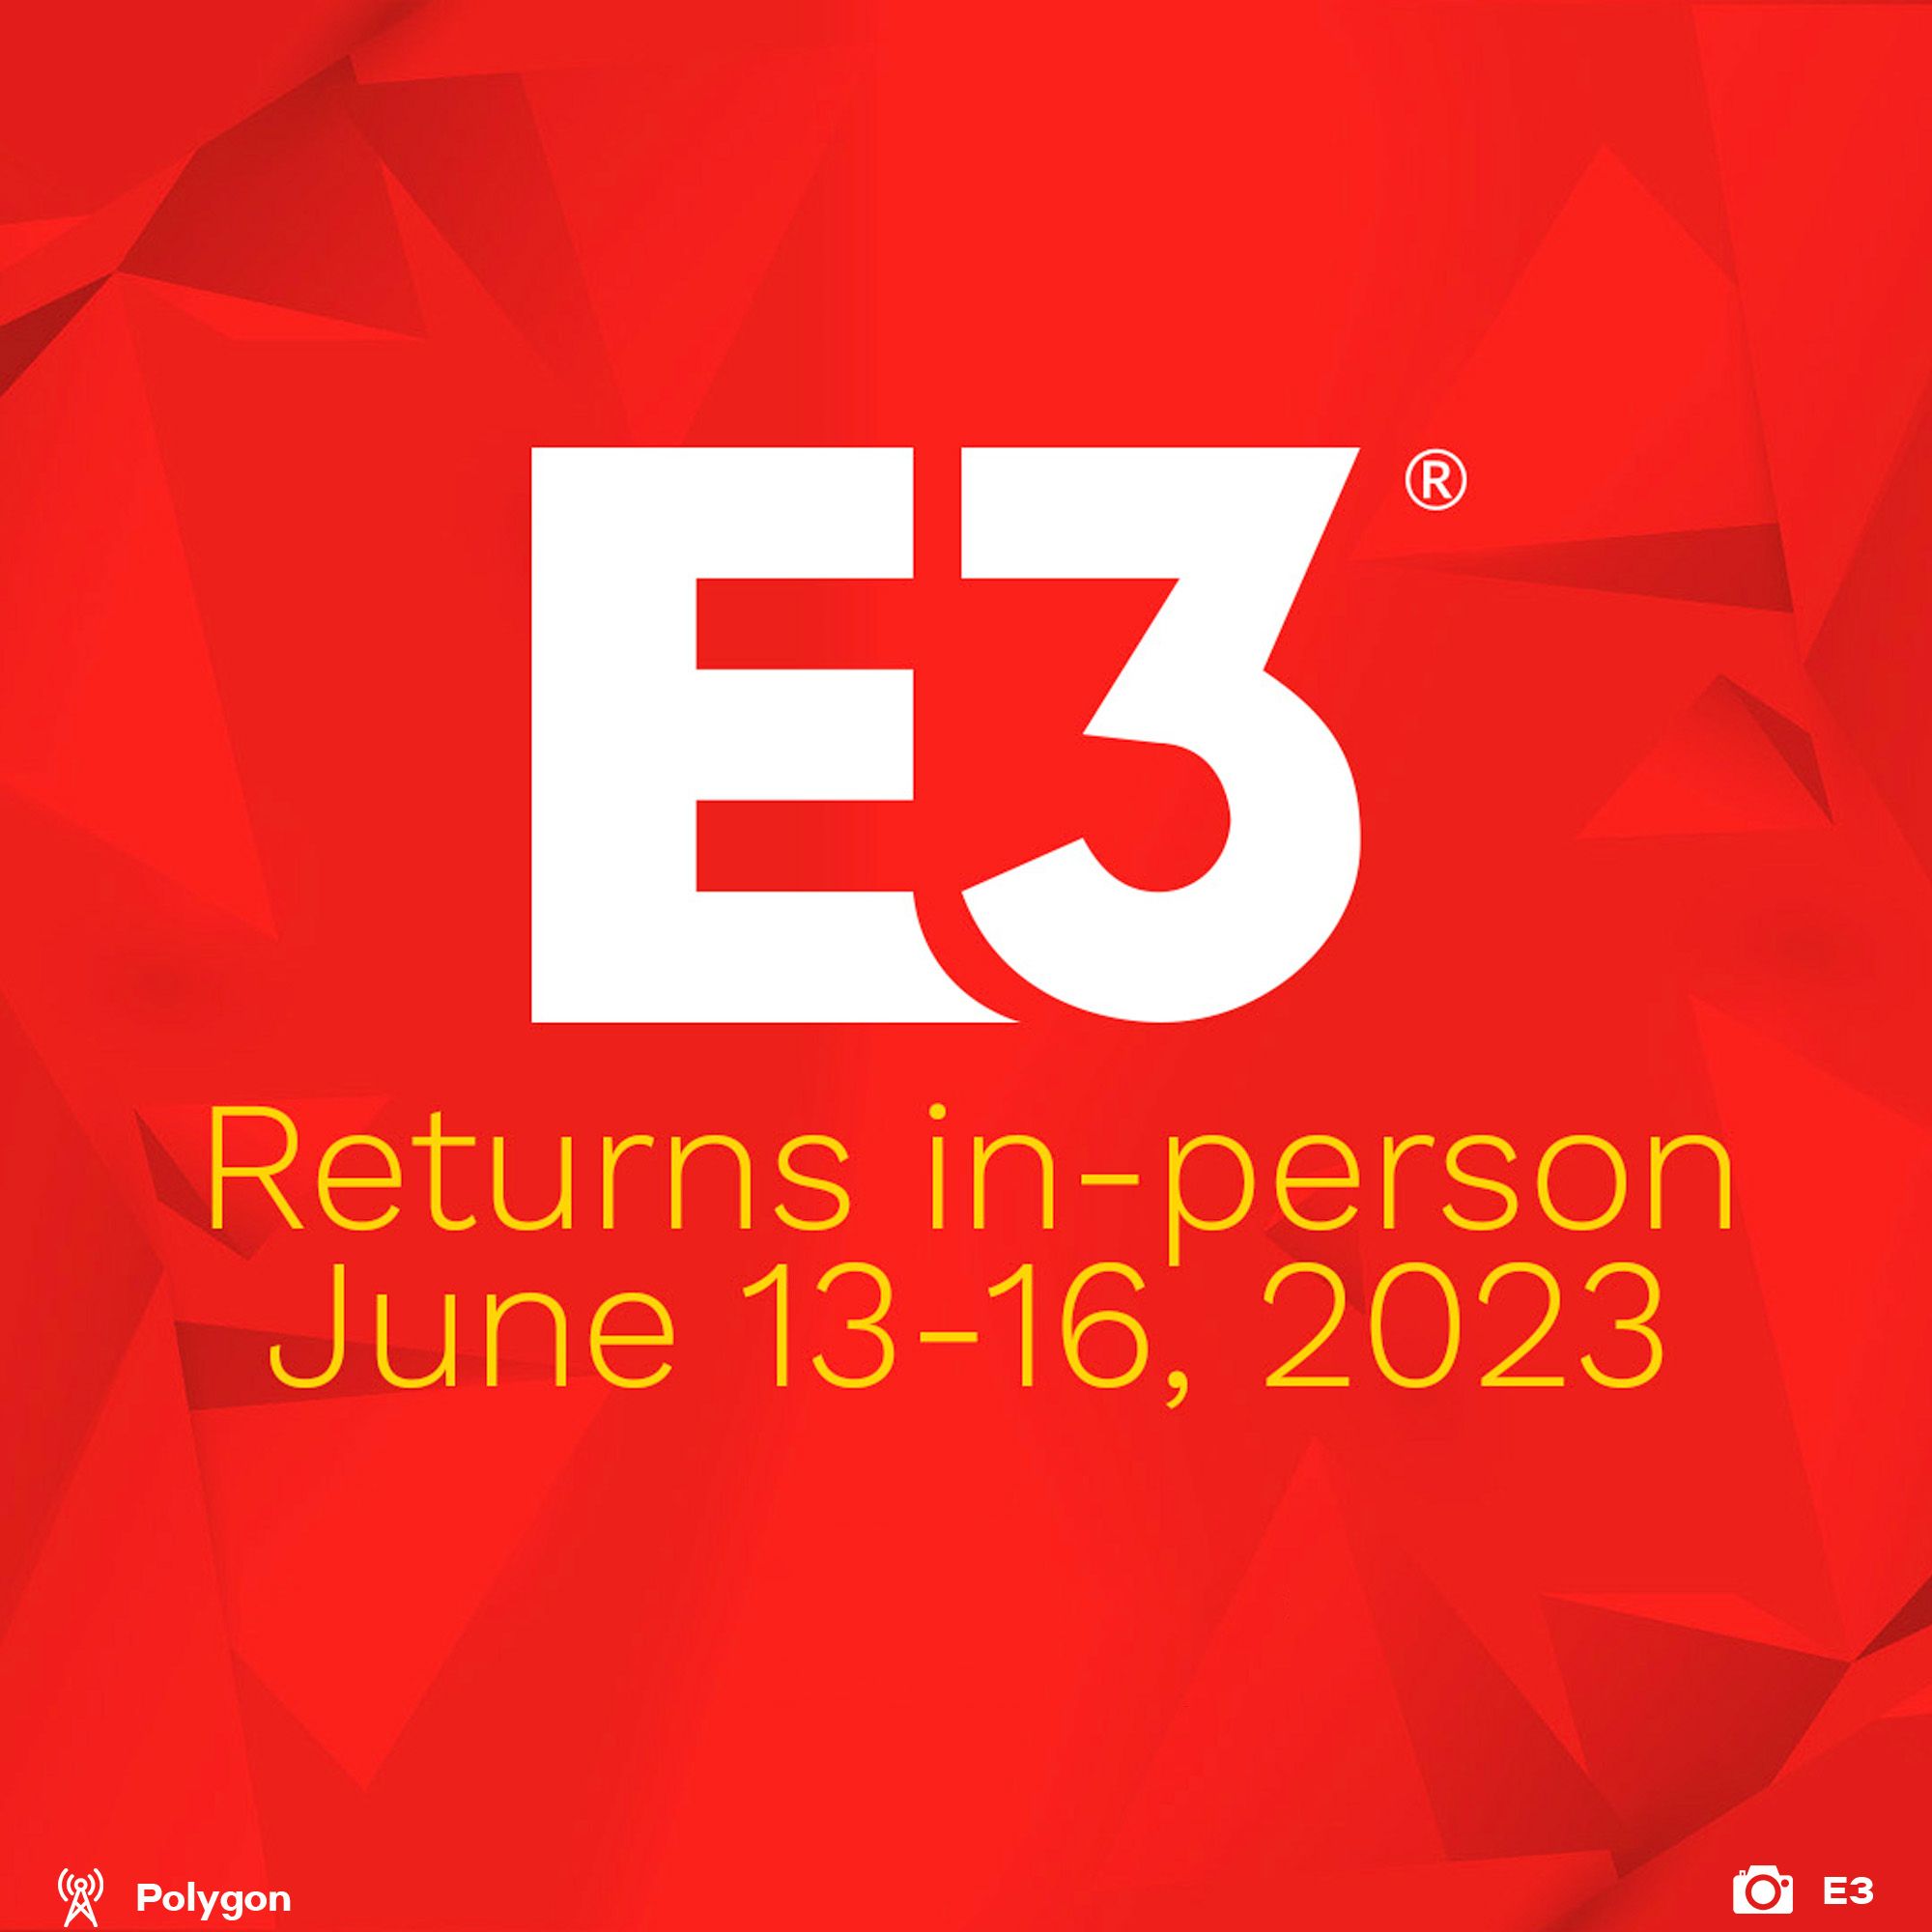 E3 is back